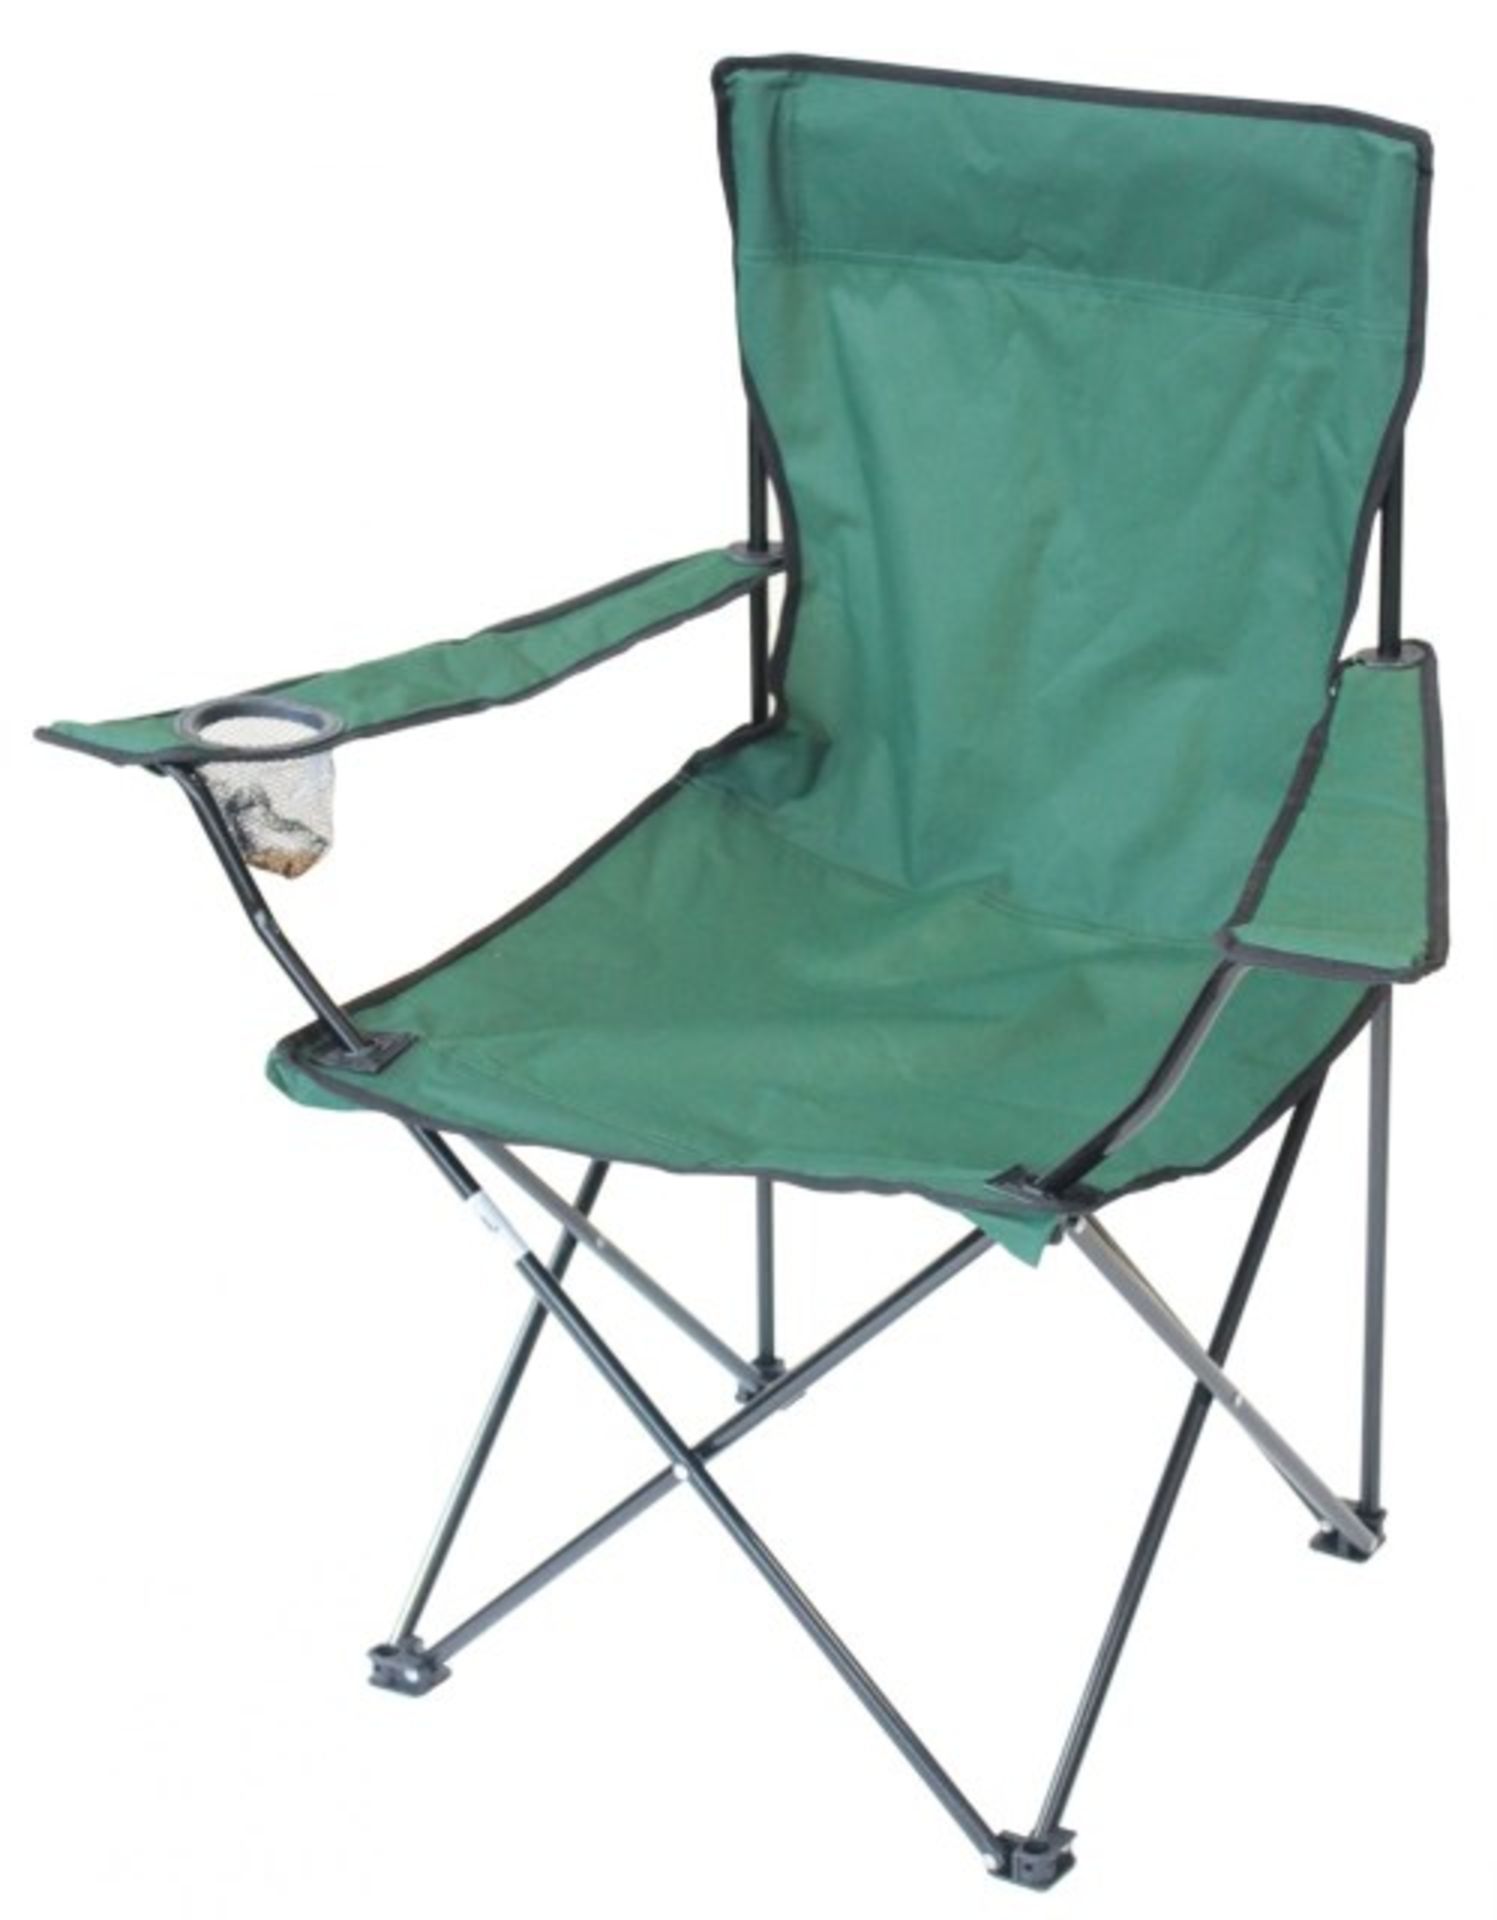 V Brand New Essential Camping Chair With Cup Holder X 60 Bid price to be multiplied by Sixty